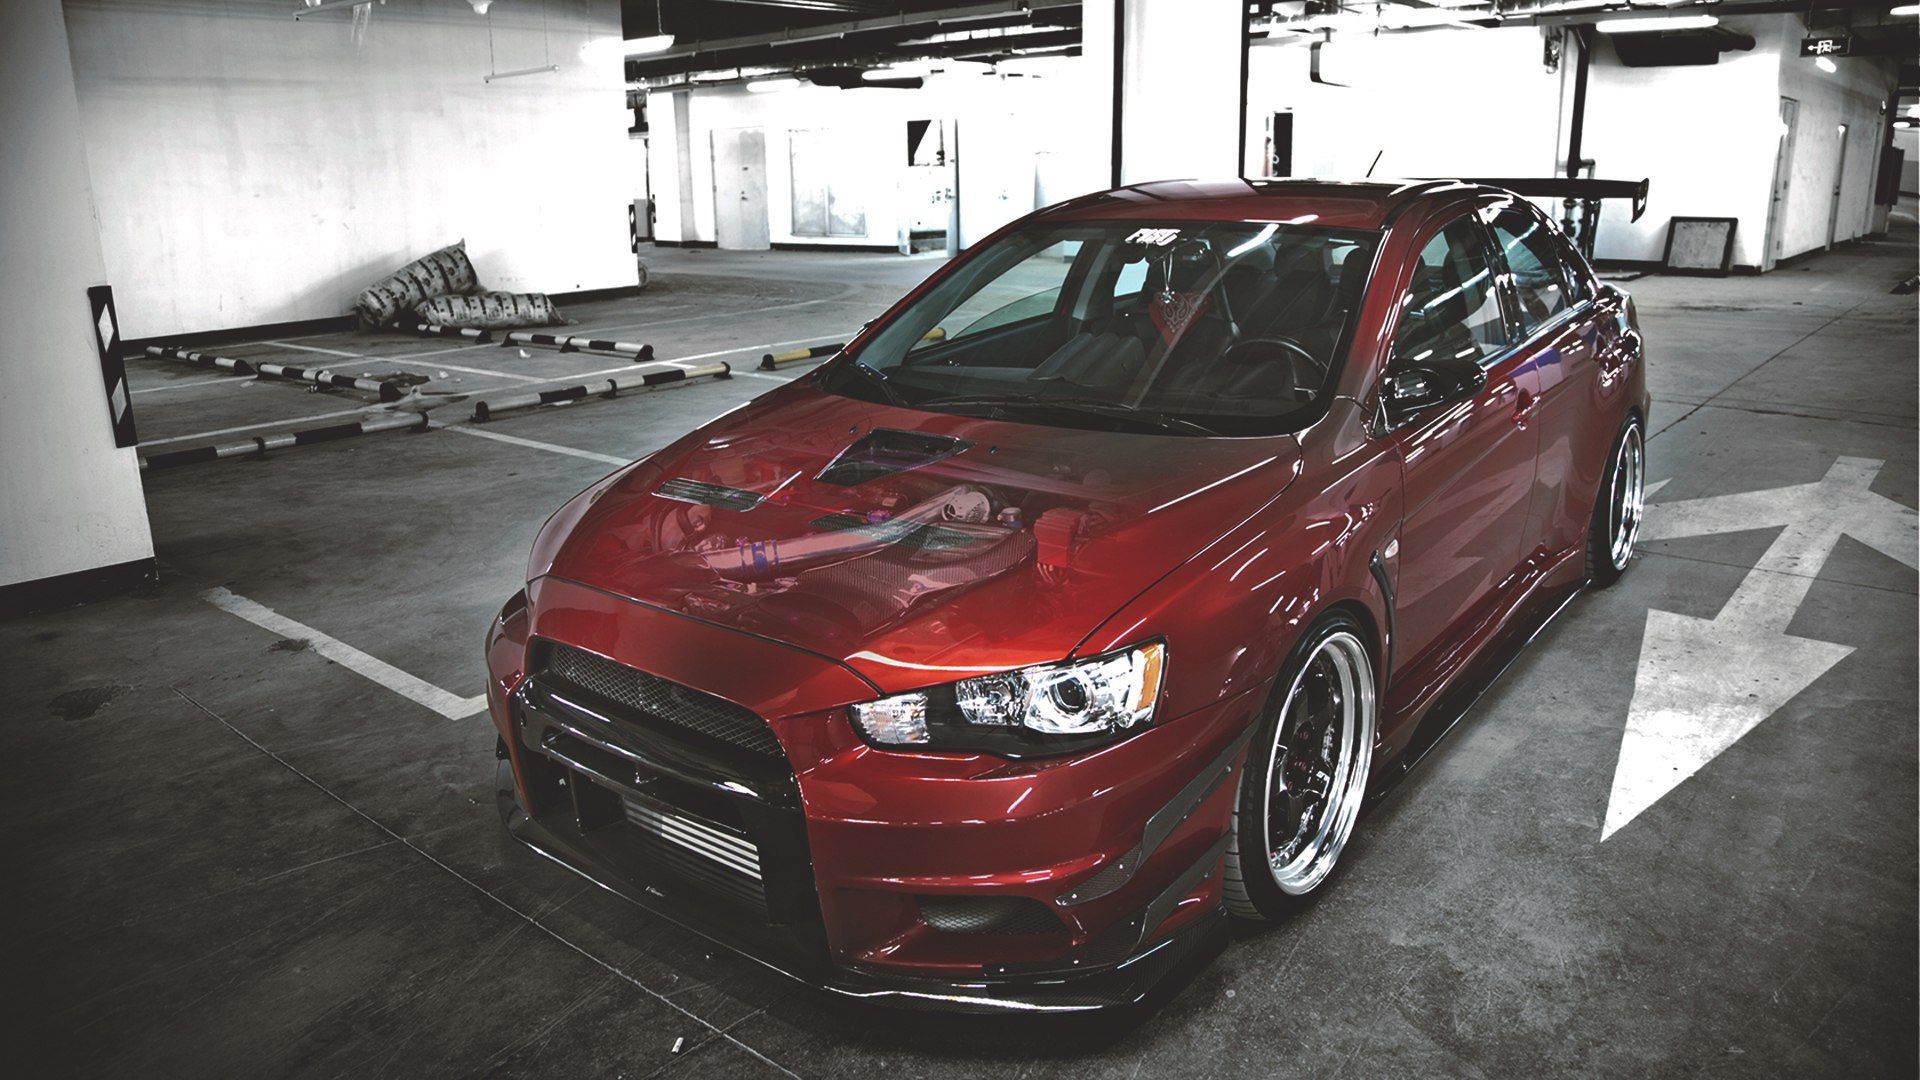 Red Mitsubishi Lancer Evolution X wallpapers and images ...